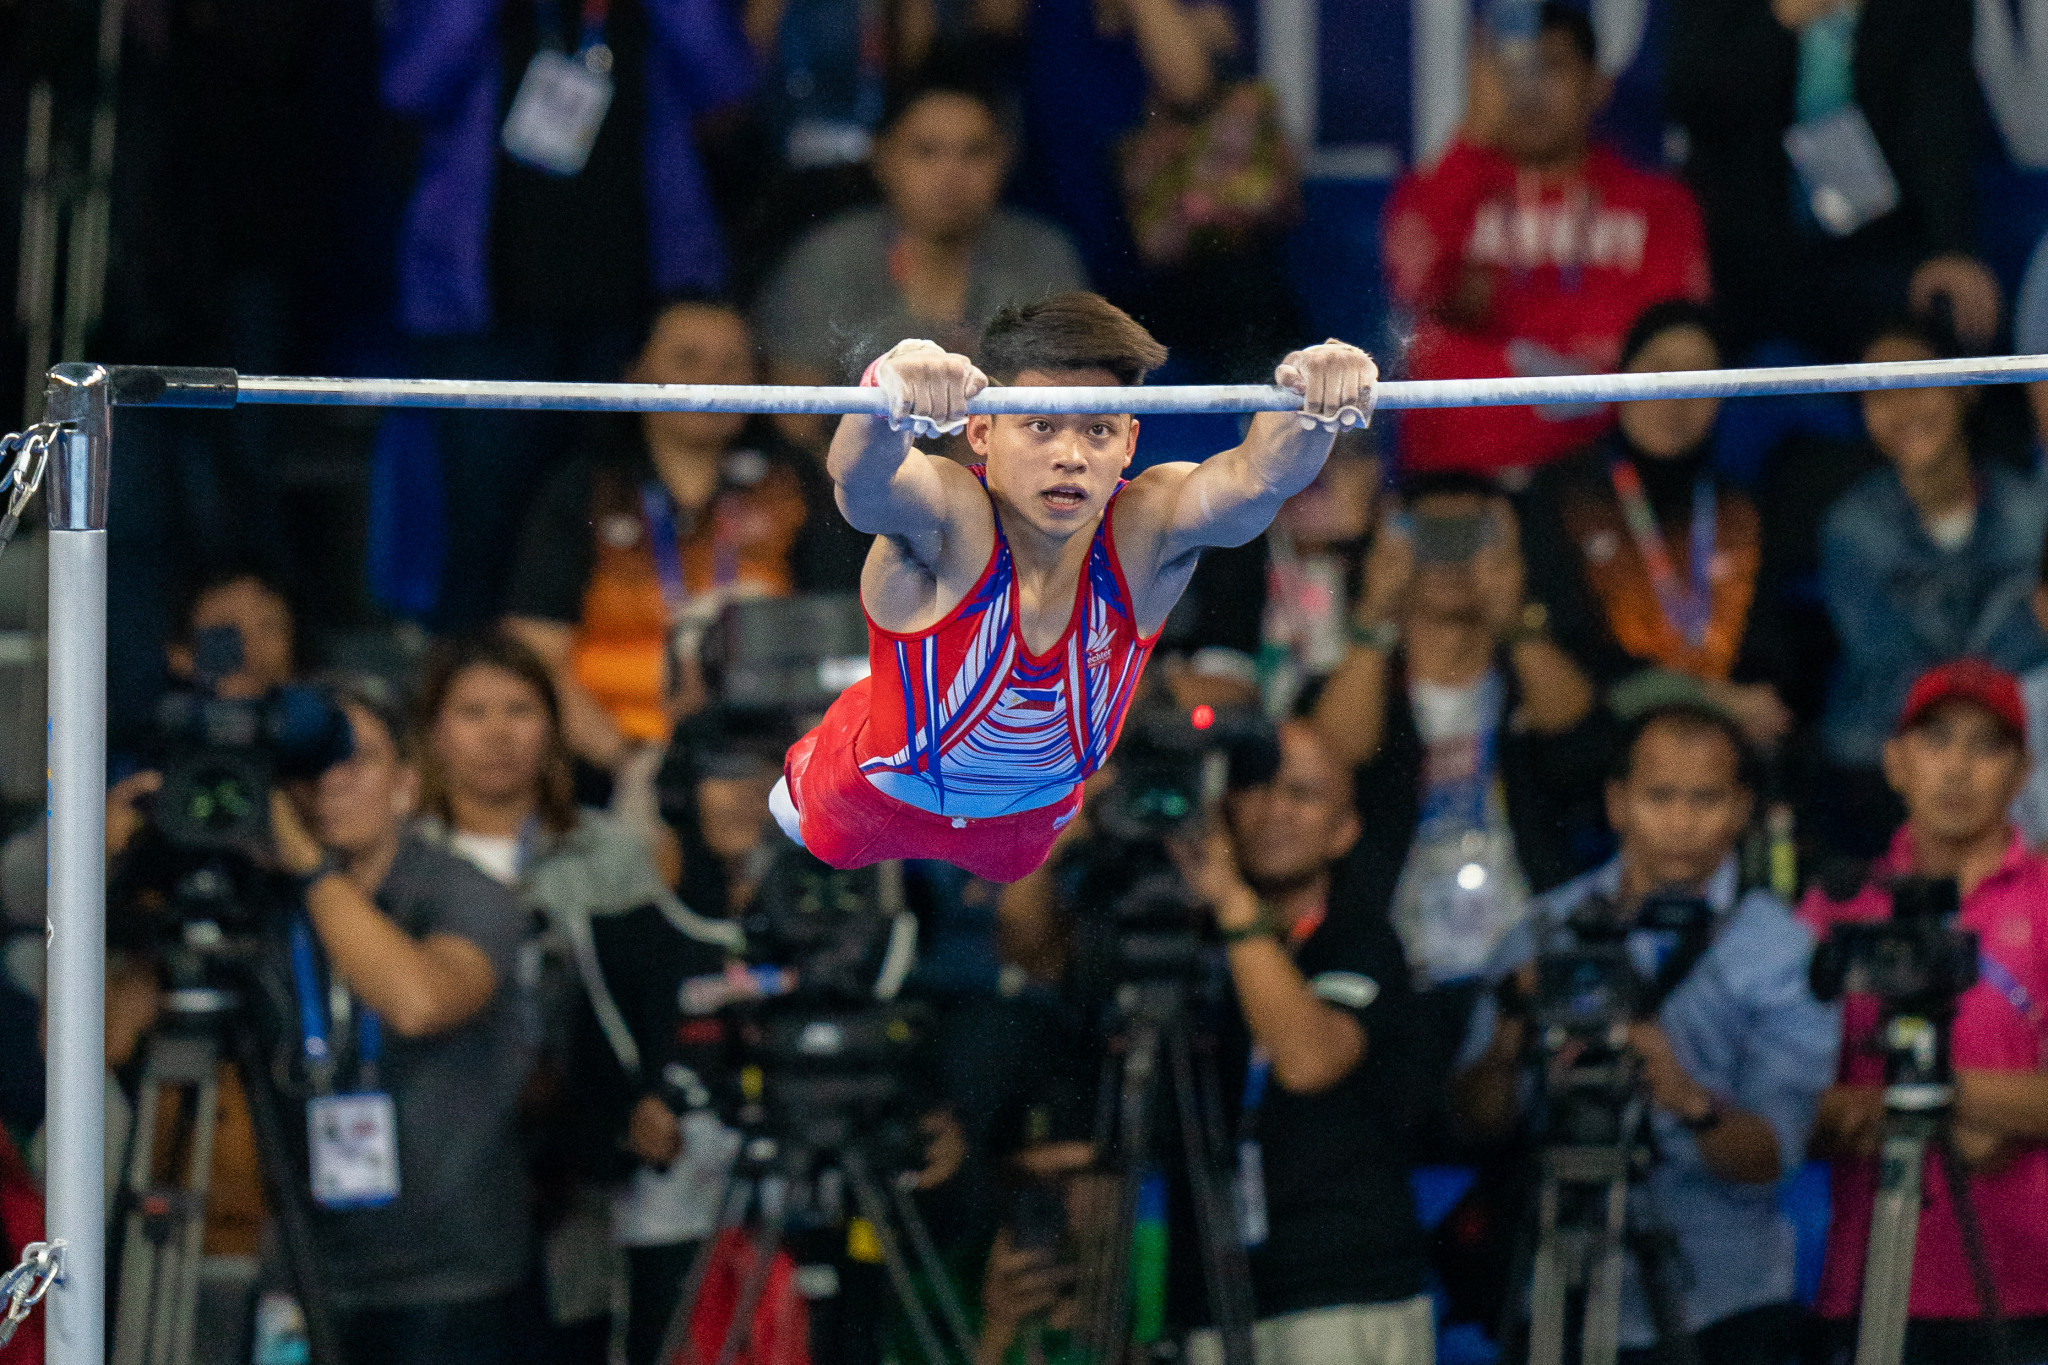 World gymnastics champion Carlos Yulo could be a medal contender for the Philippines at the Tokyo 2020 Olympic Games ©Getty Images